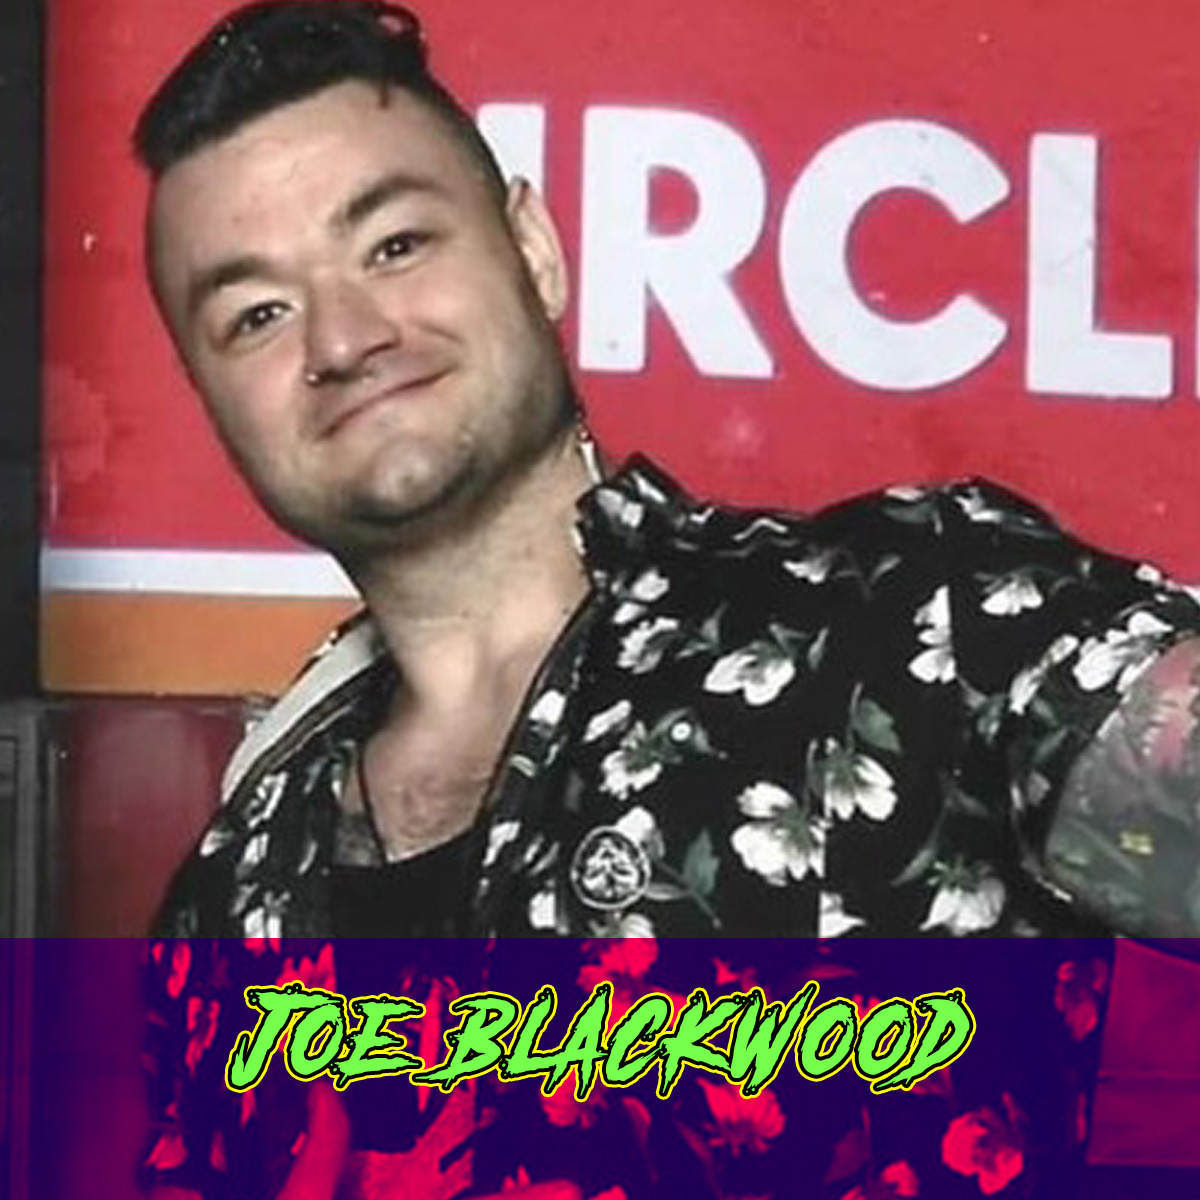 Cast Announcement #10! Joe Blackwood reprises his role as the monster Krhonos for this new vision of Death World. 

Bartender by day, he is a musician and artist as well as a devoted dog dad & husband. 

#IndieFilm #FilmTexas #SupportIndieFilm